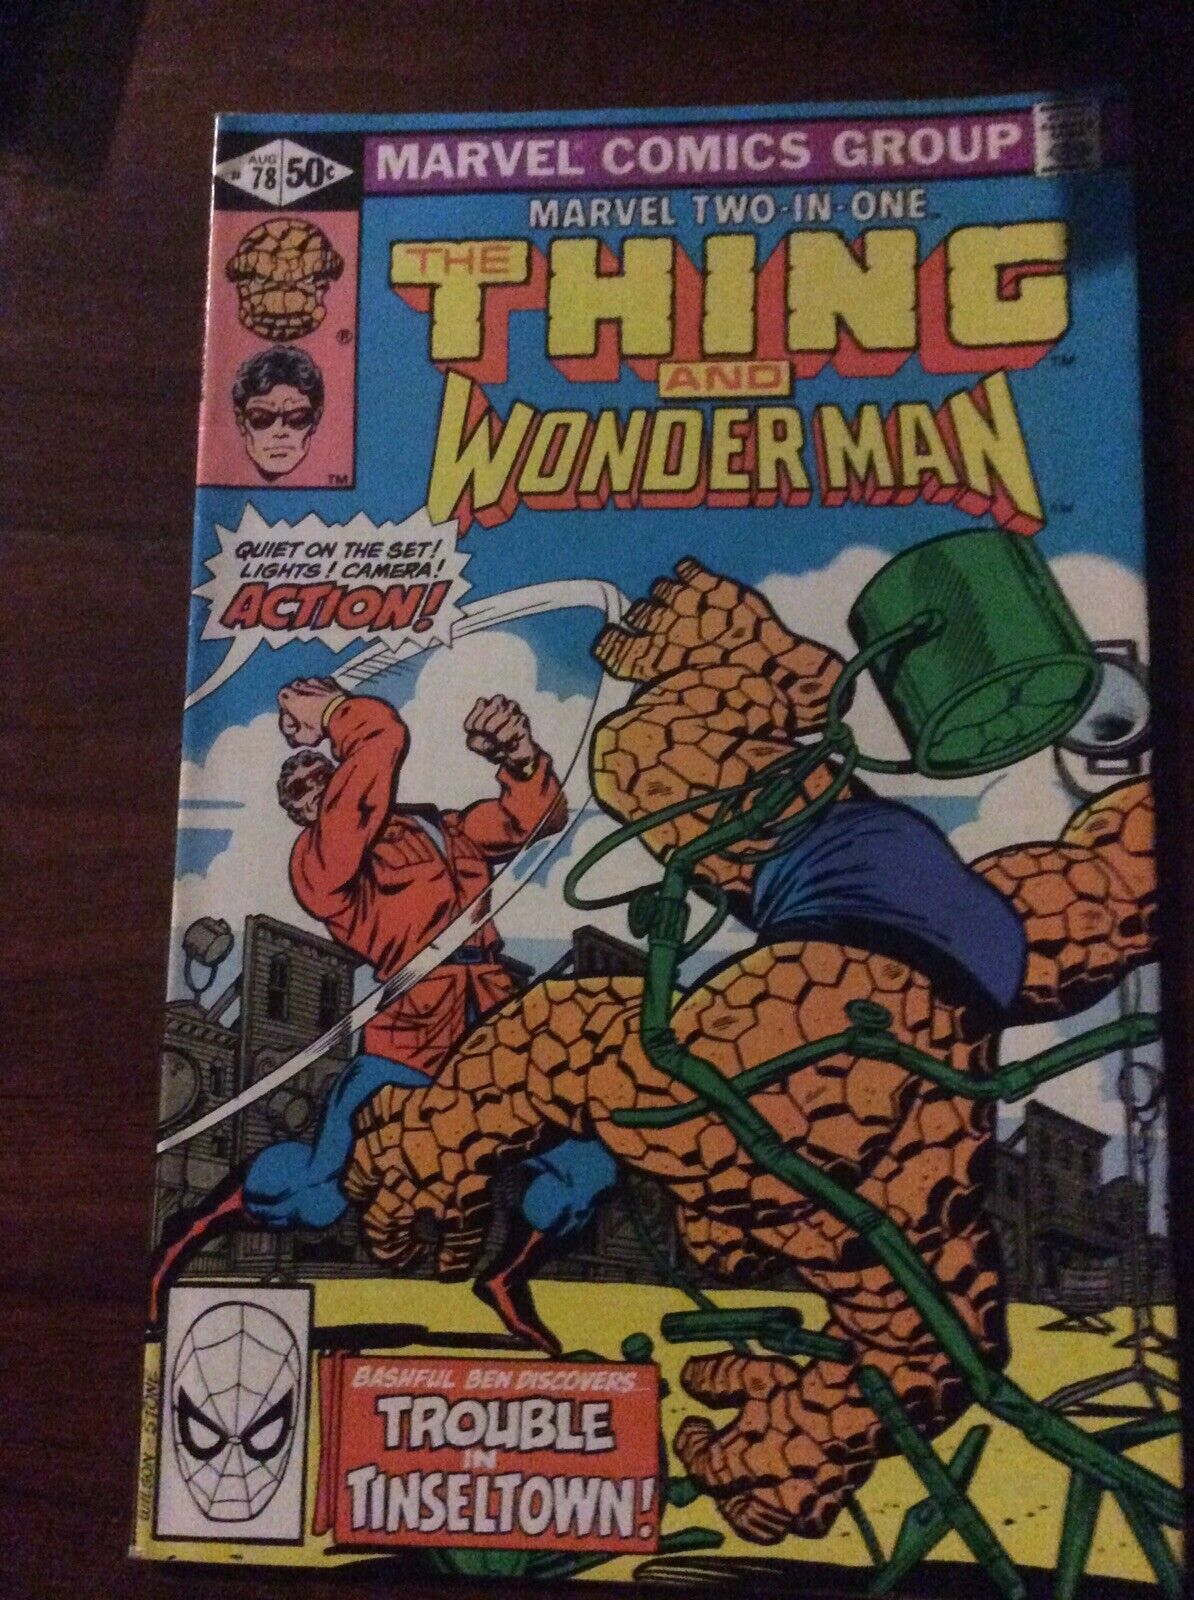 Marvel Two-In-One #78 Wonder Man. 1st Appearance Of Dungeons And Dragons